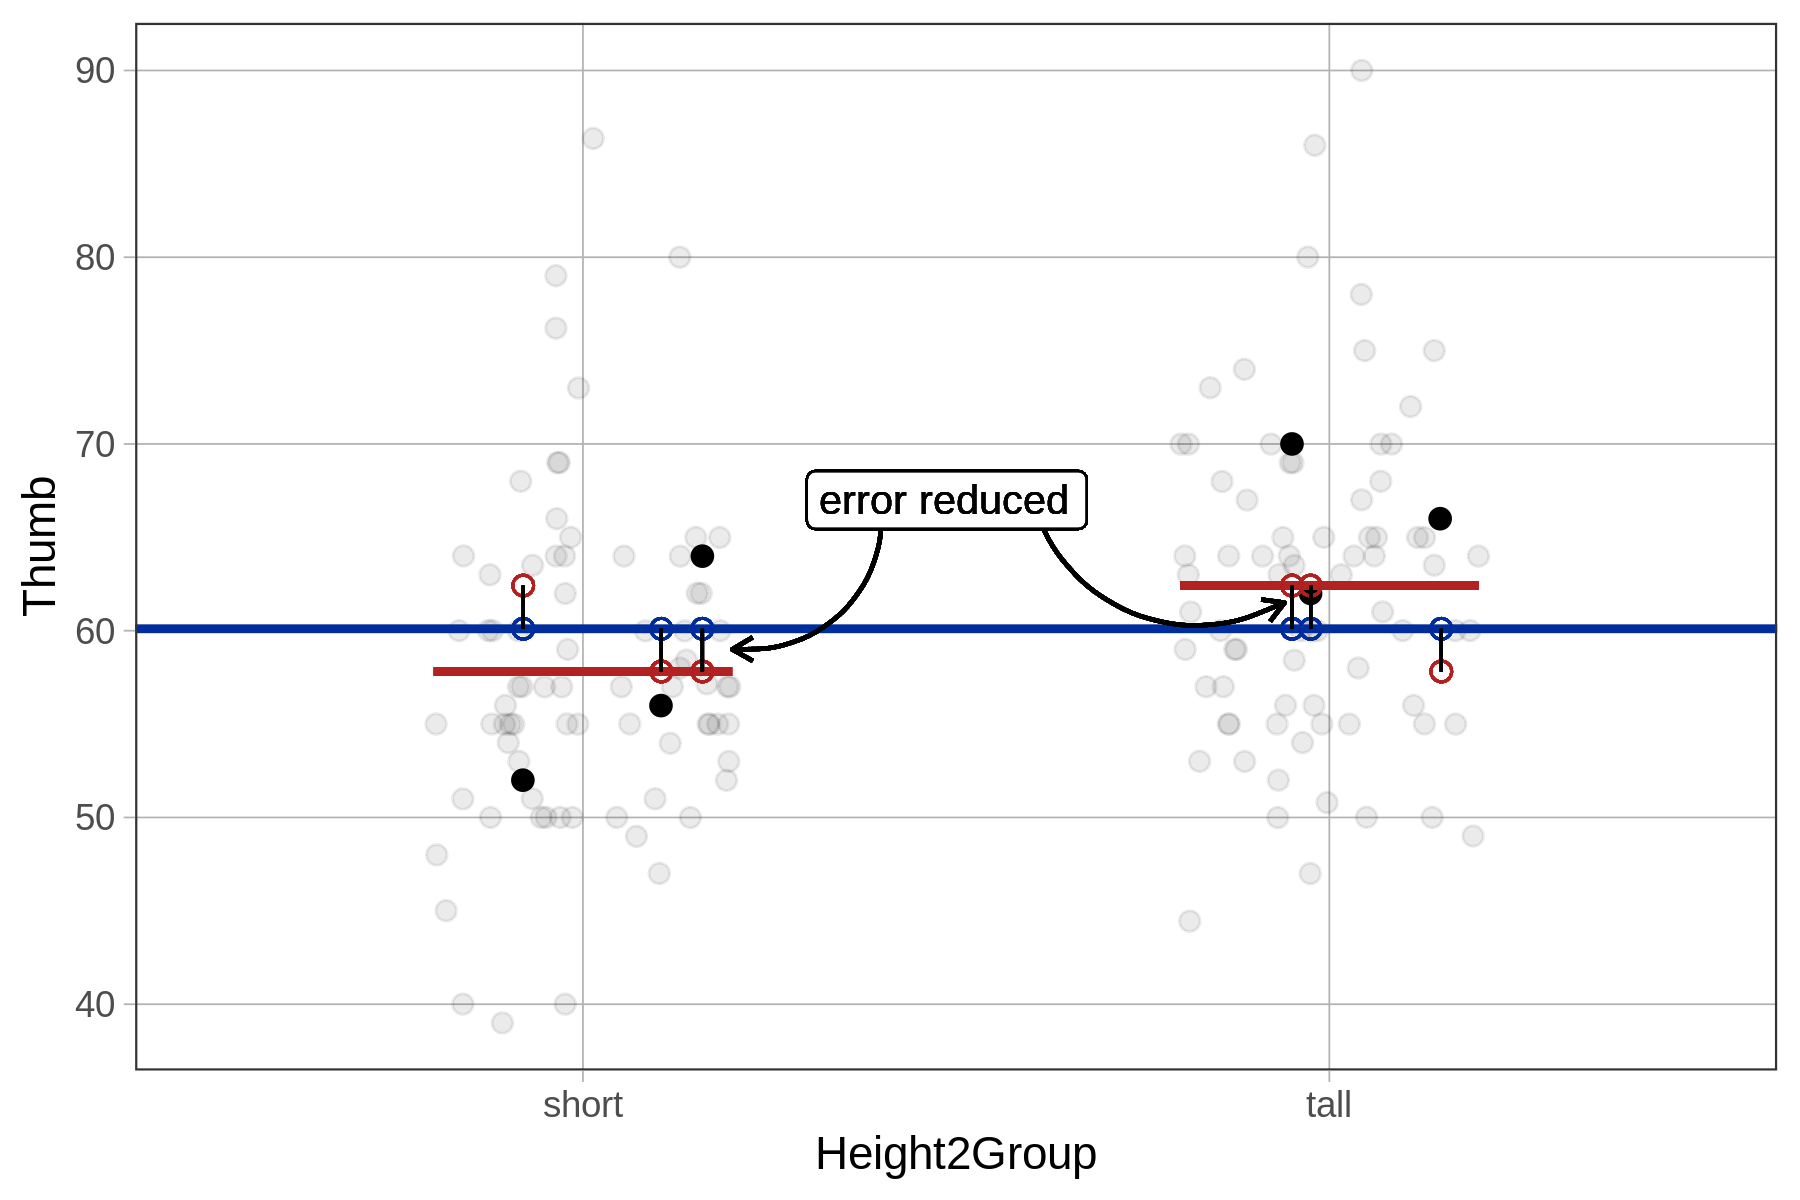 On the left, a jitter plot of Thumb predicted by Height2Group (short and tall), with the empty model overlaid as a blue horizontal line through the mean of Thumb, and Height2Group model overlaid as red horizontal lines through the mean of each group. The vertical distance between the predictions of each model is labeled as error reduced.